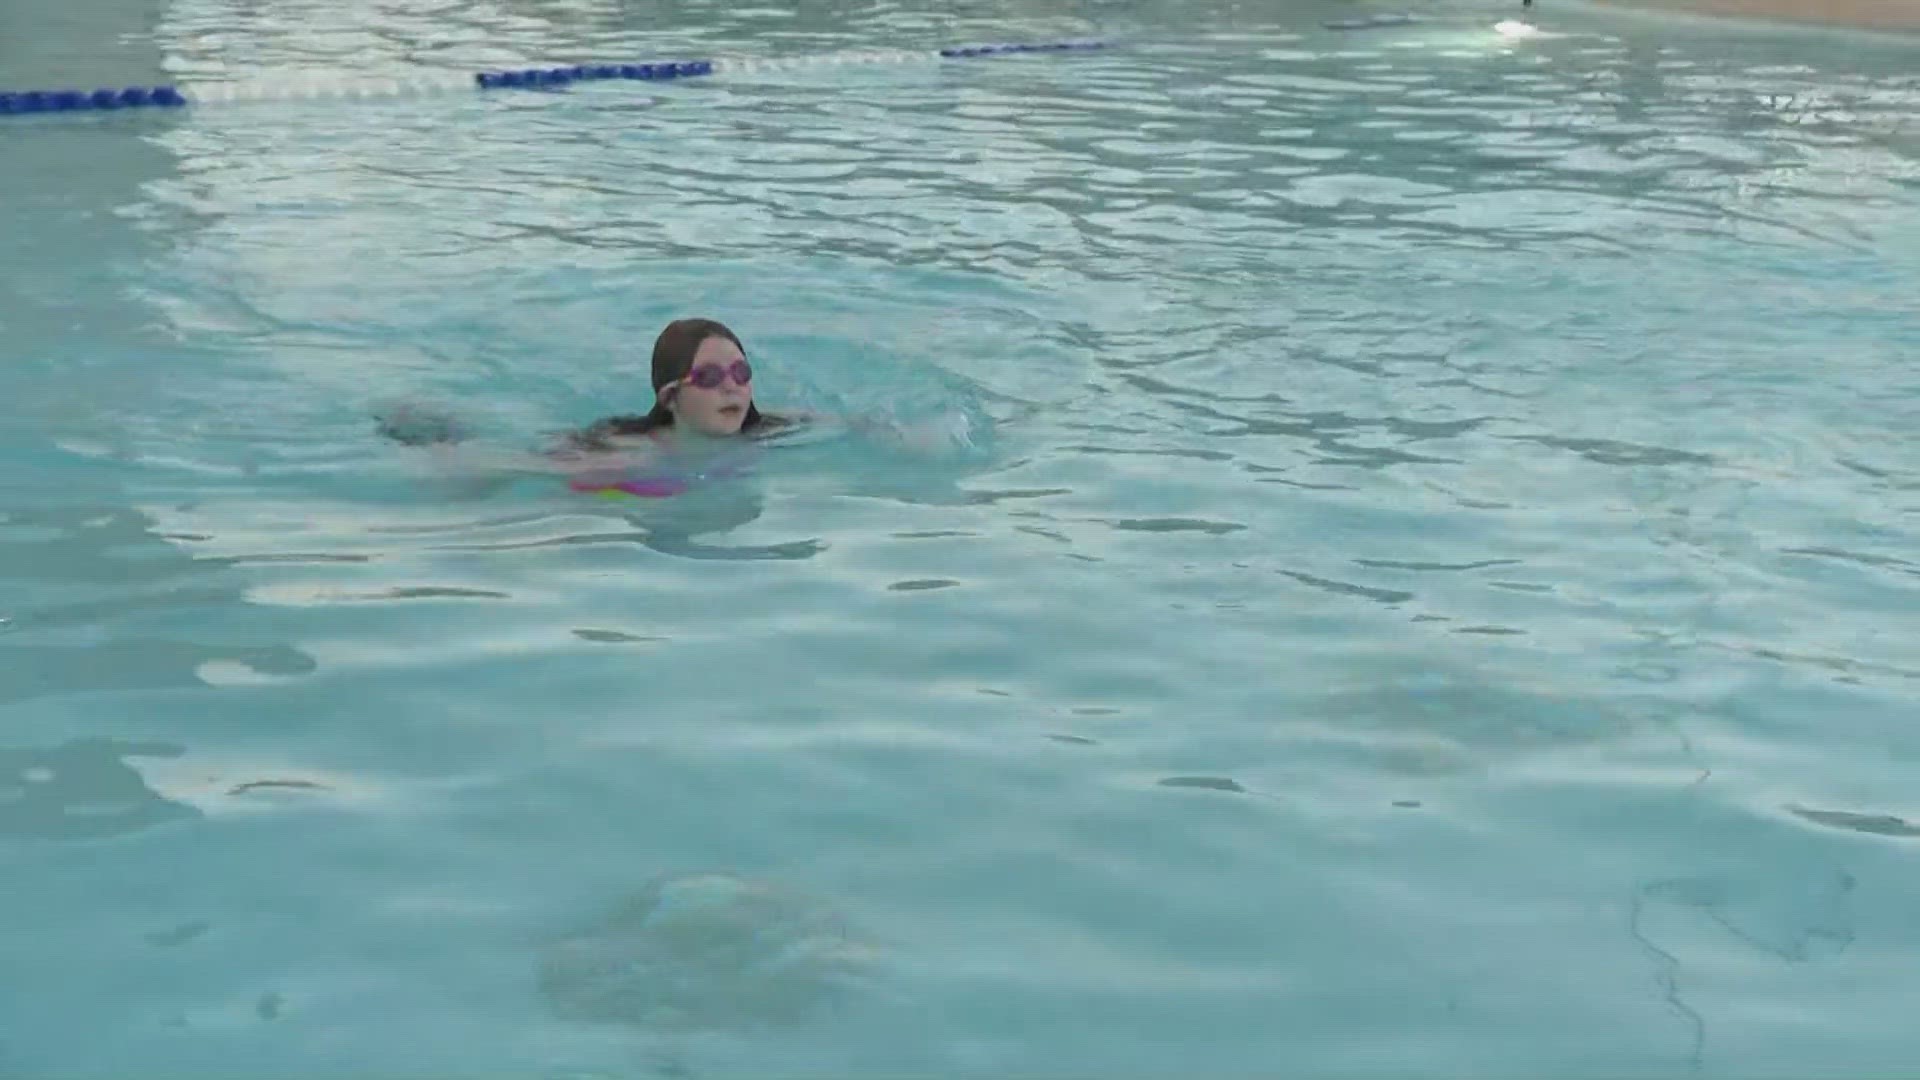 12News is working to keep you and your family safe around water. Here's why swim lessons are important and how to get enrolled.